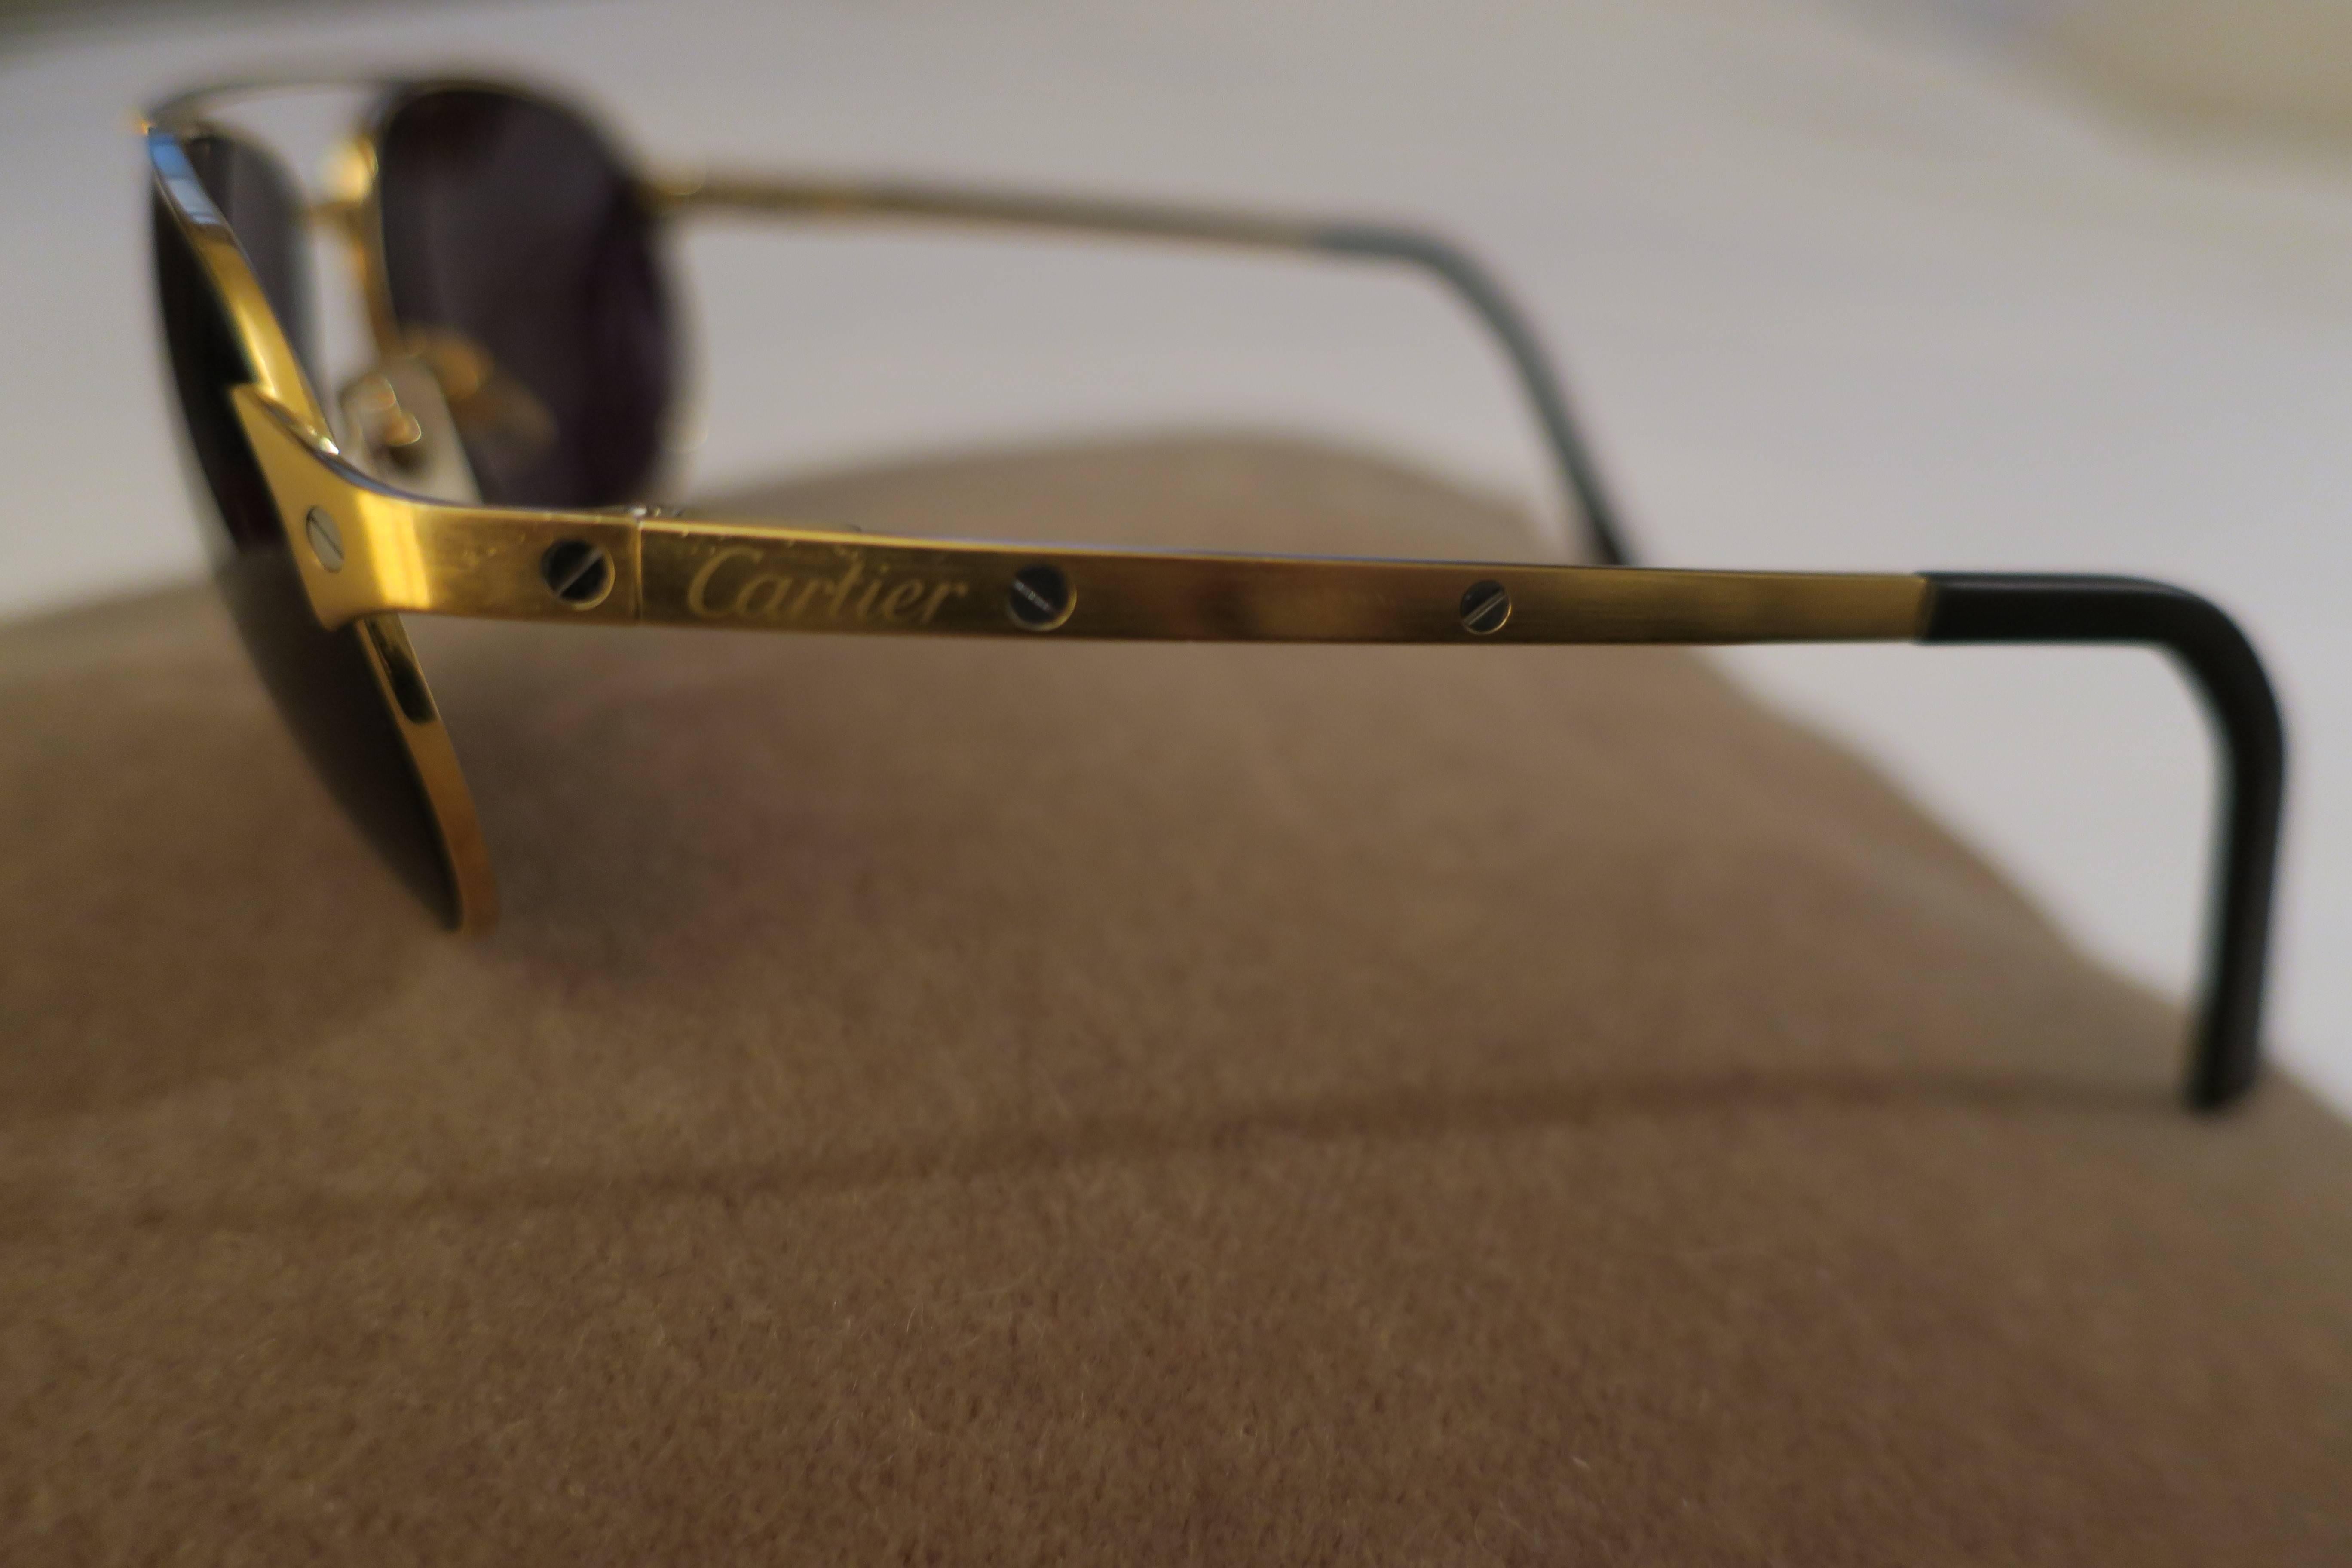 A beautiful and classic pair of authentic Cartier Santos aviator sunglasses with gold metal frame designed with the iconic 'Santo' screw detail. Sunglasses have polarized and custom dark lens for protection and privacy. Marker's mark: 